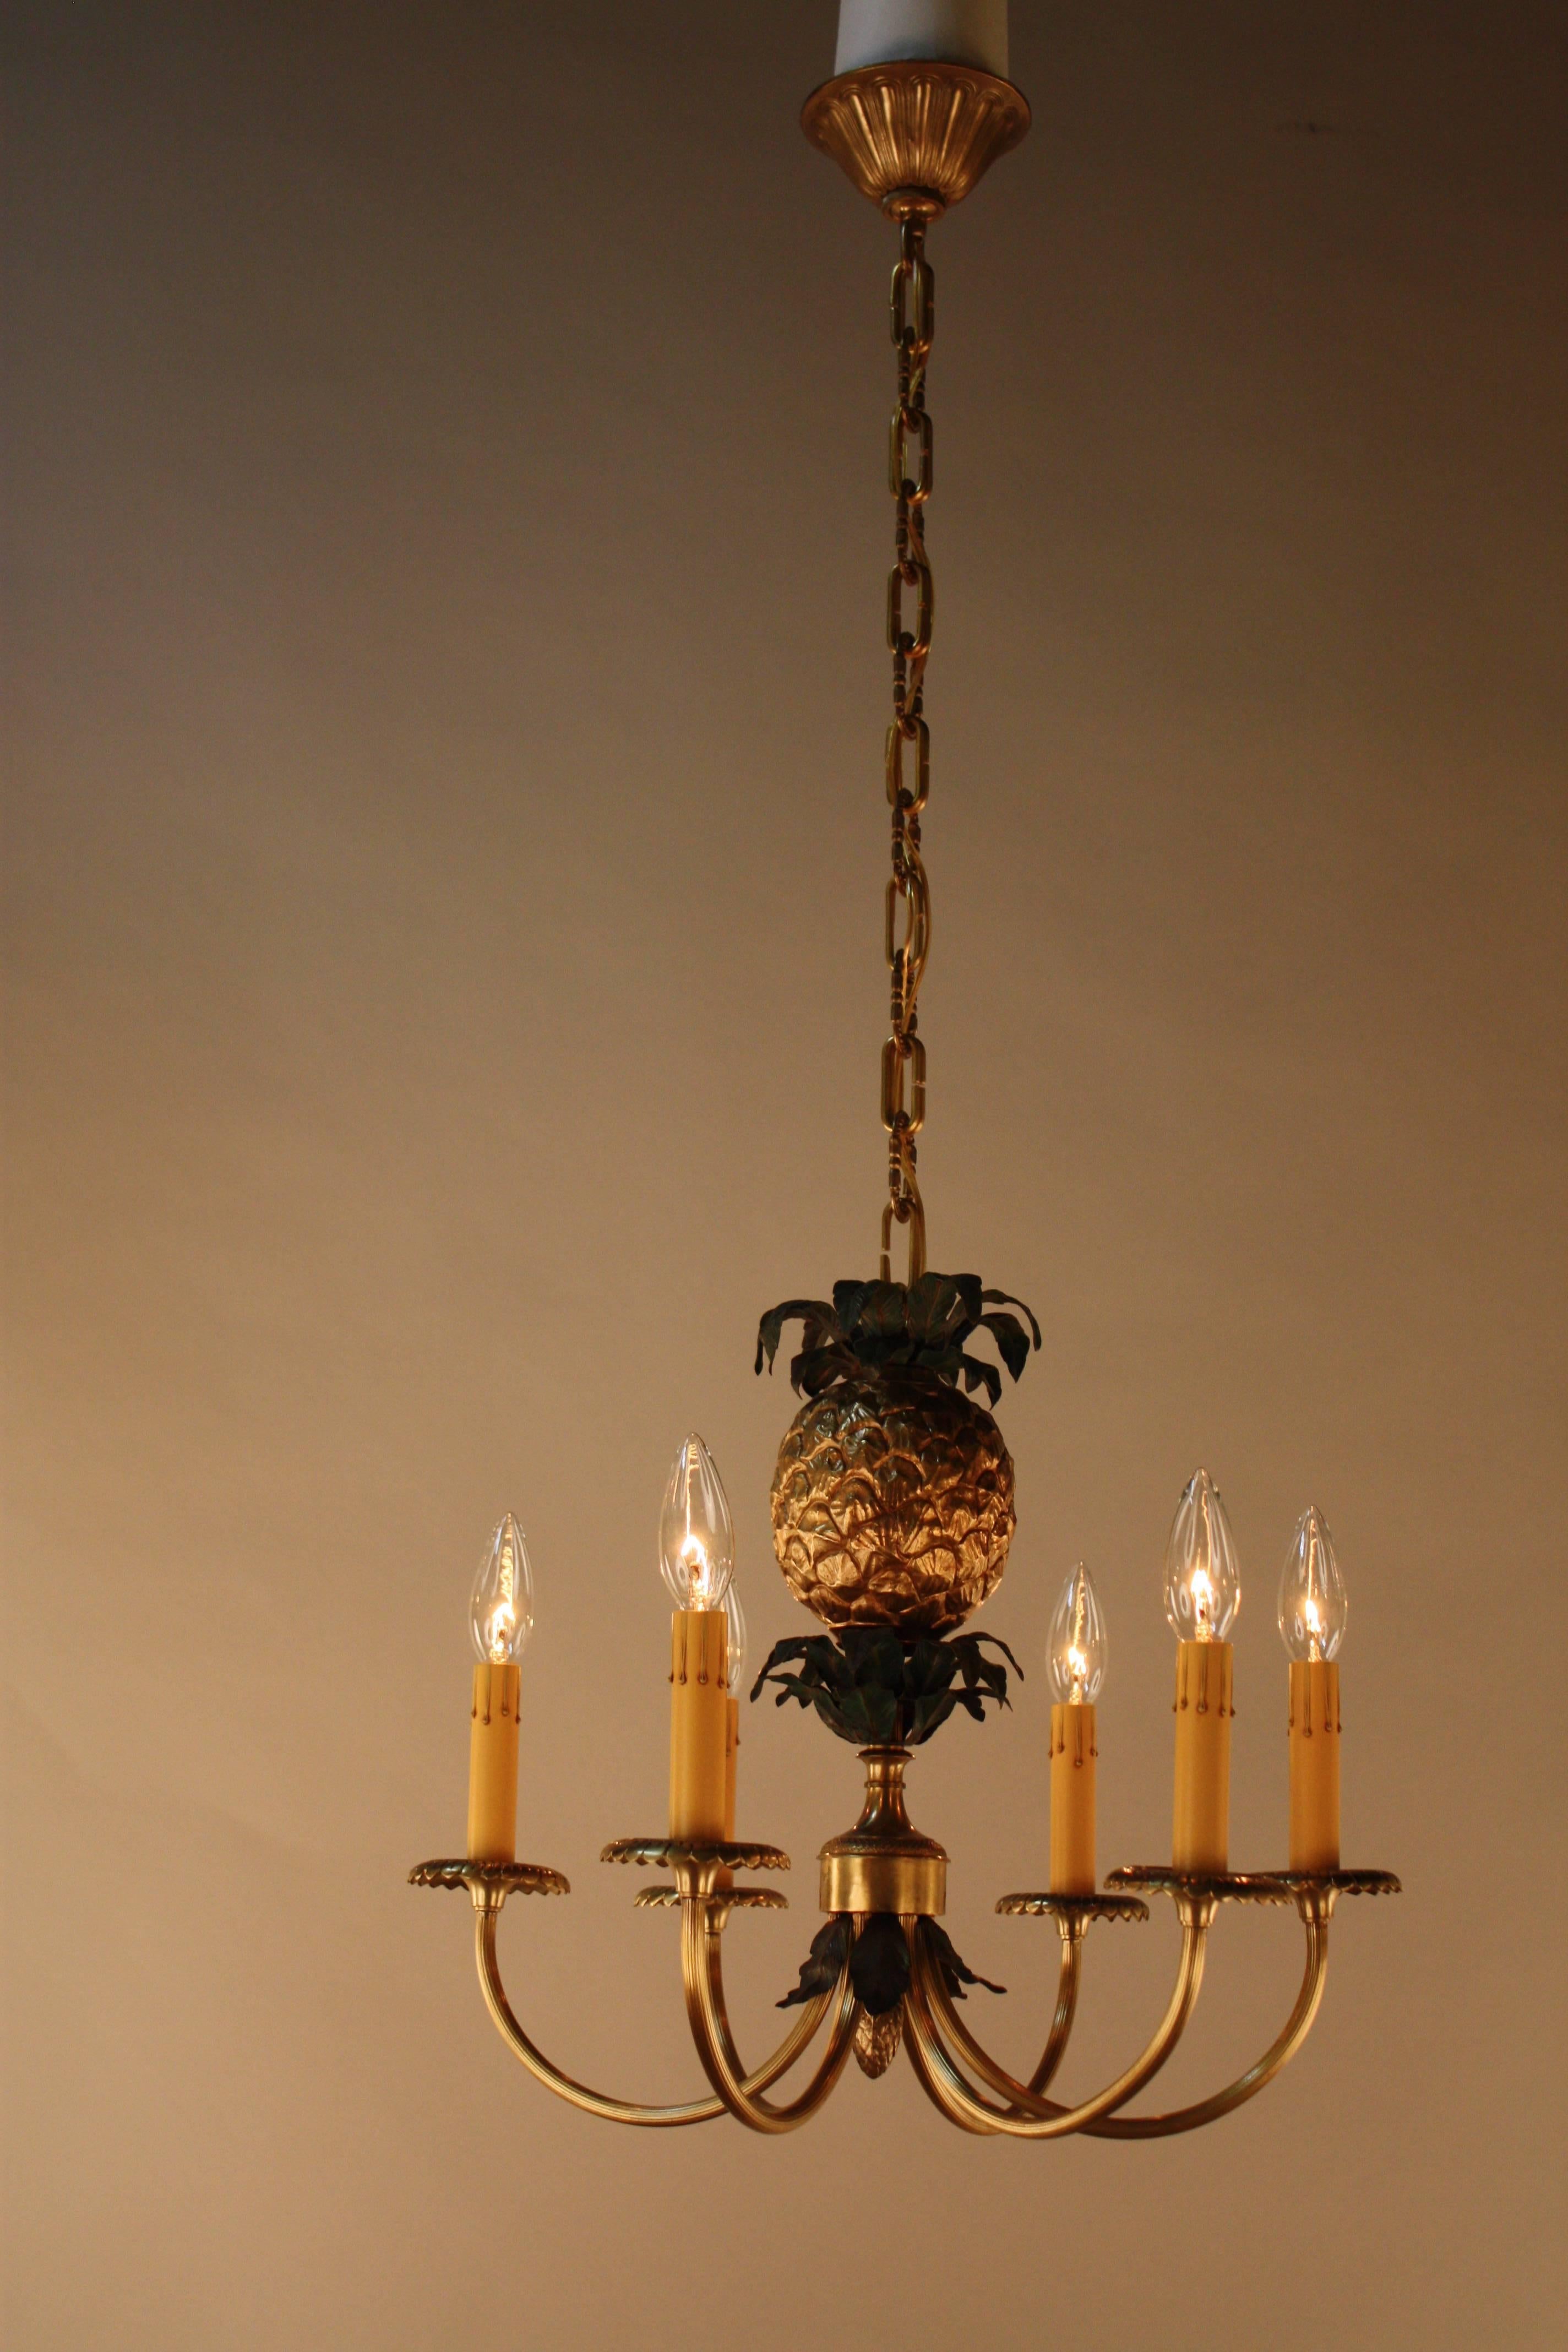 Bronze 1950s six-light pineapple chandelier by Maison Charles.